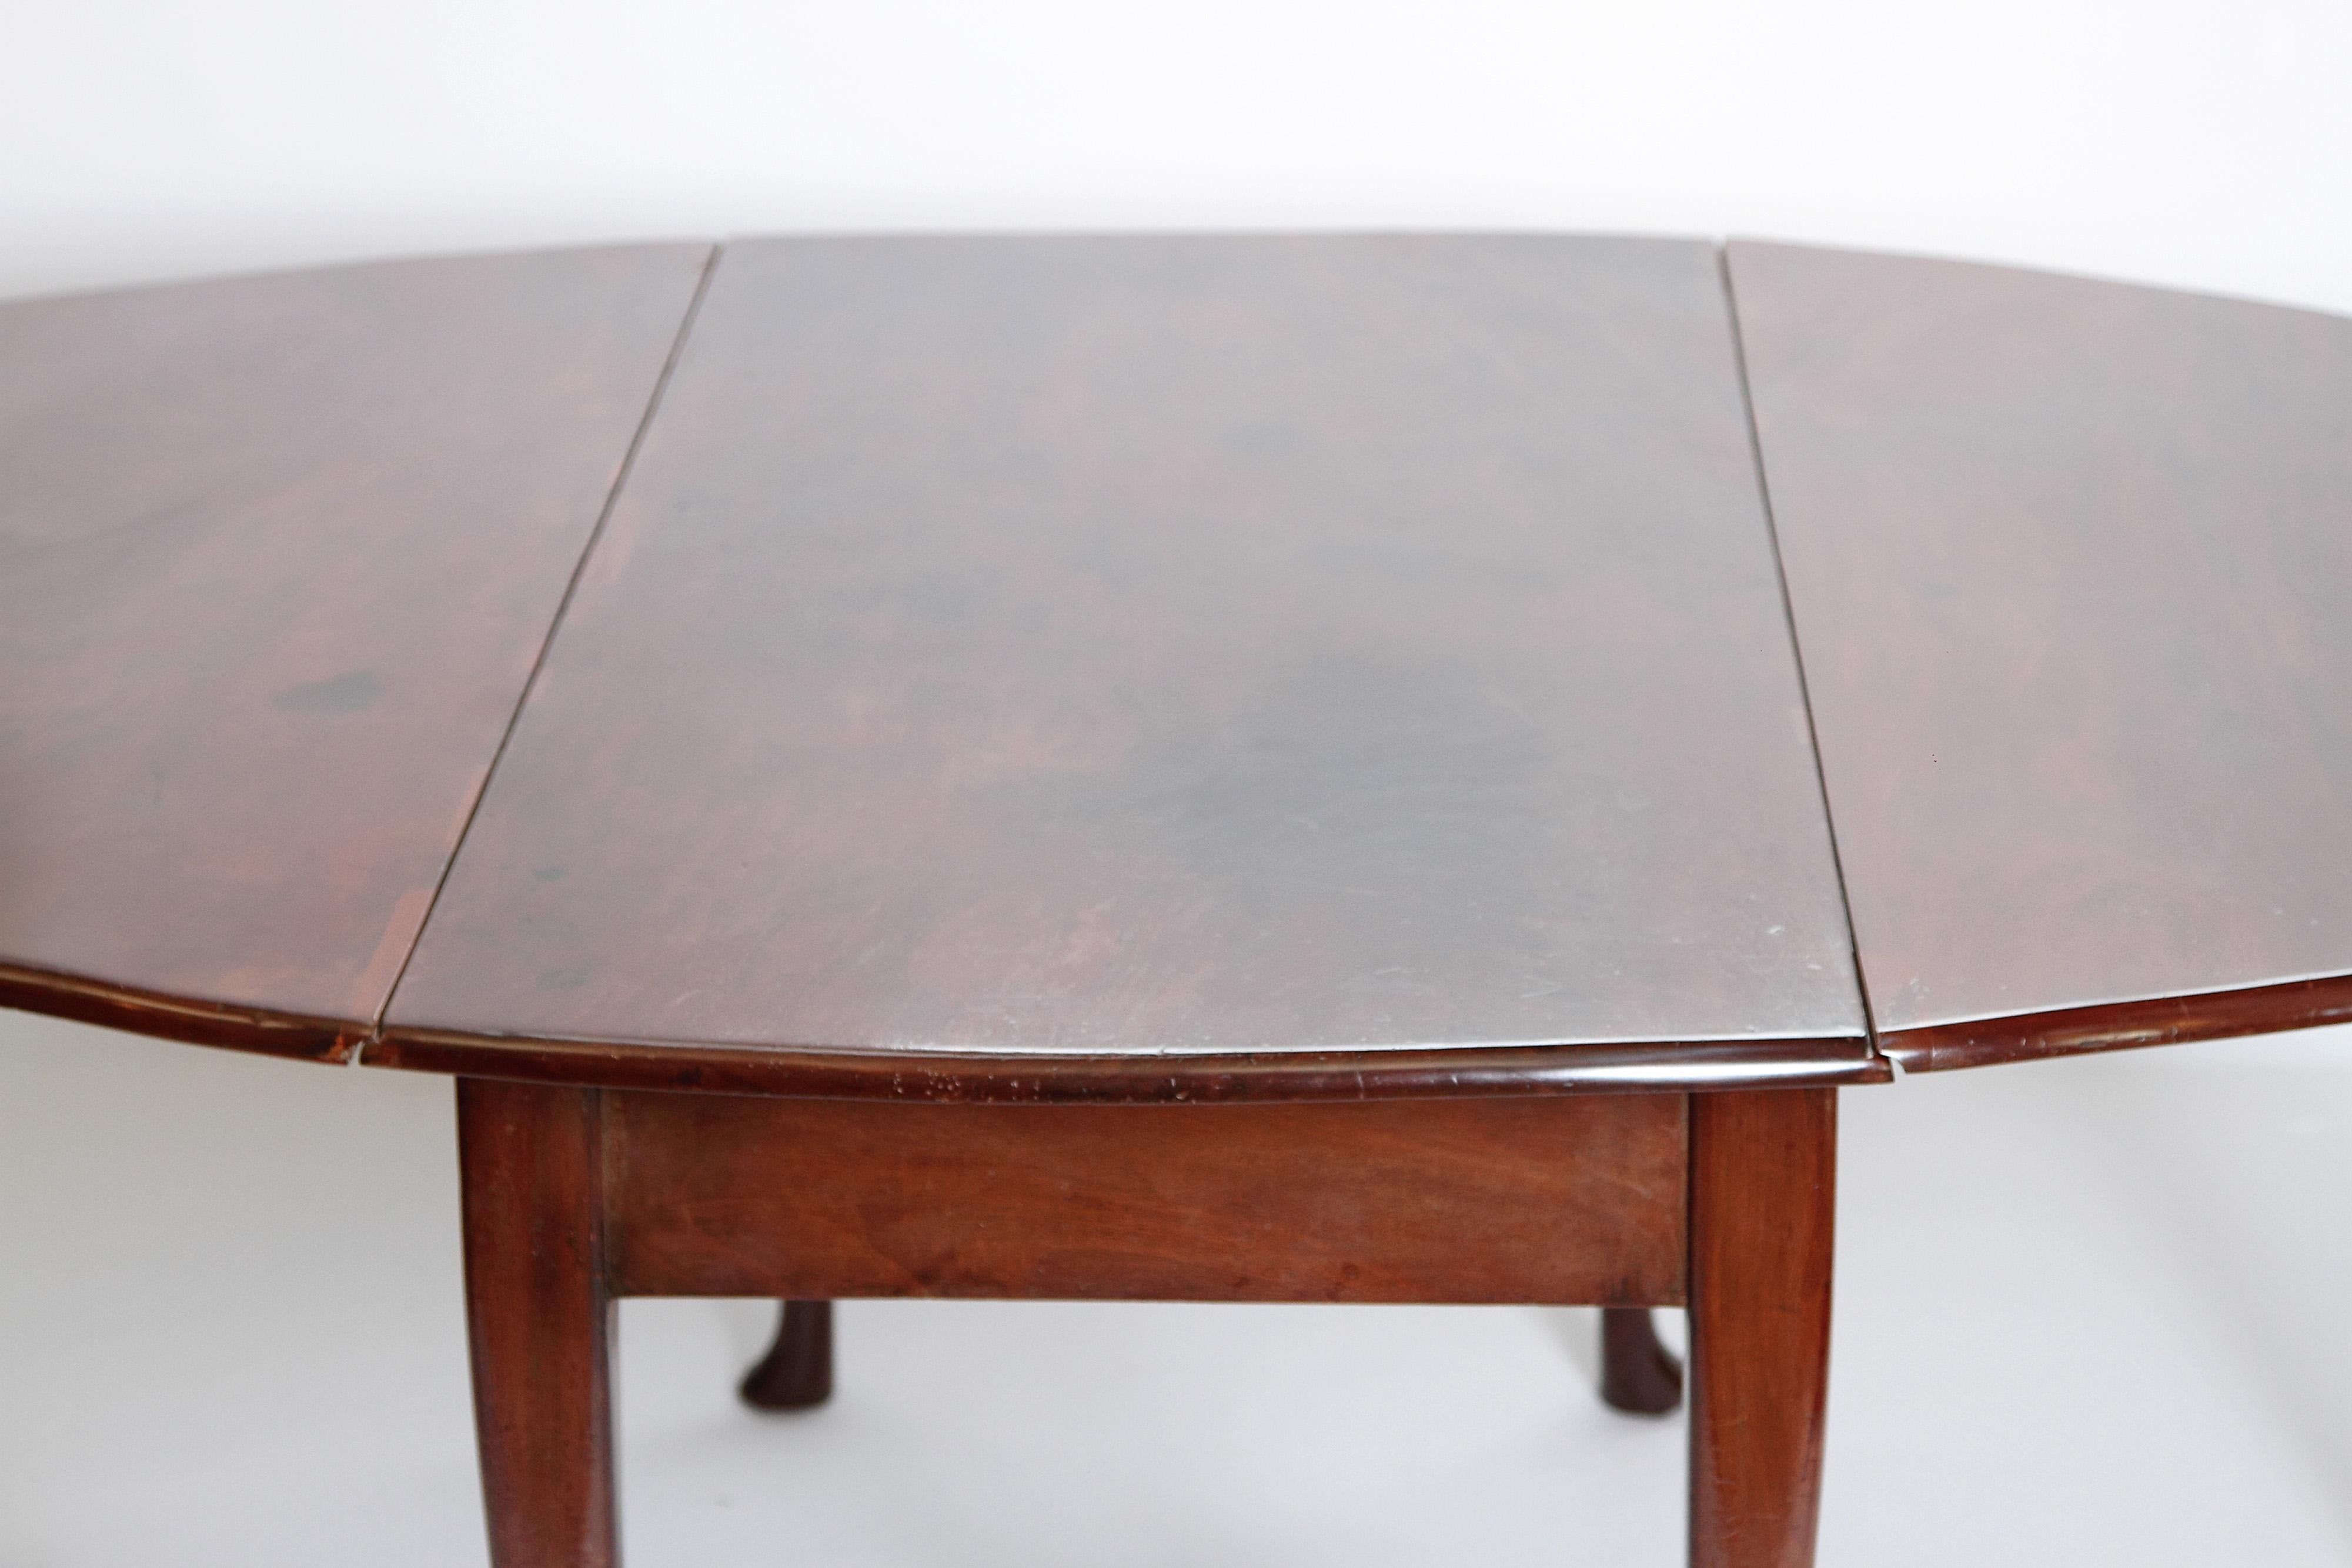 Hand-Carved George II Mahogany Dining Table with Spanish Feet